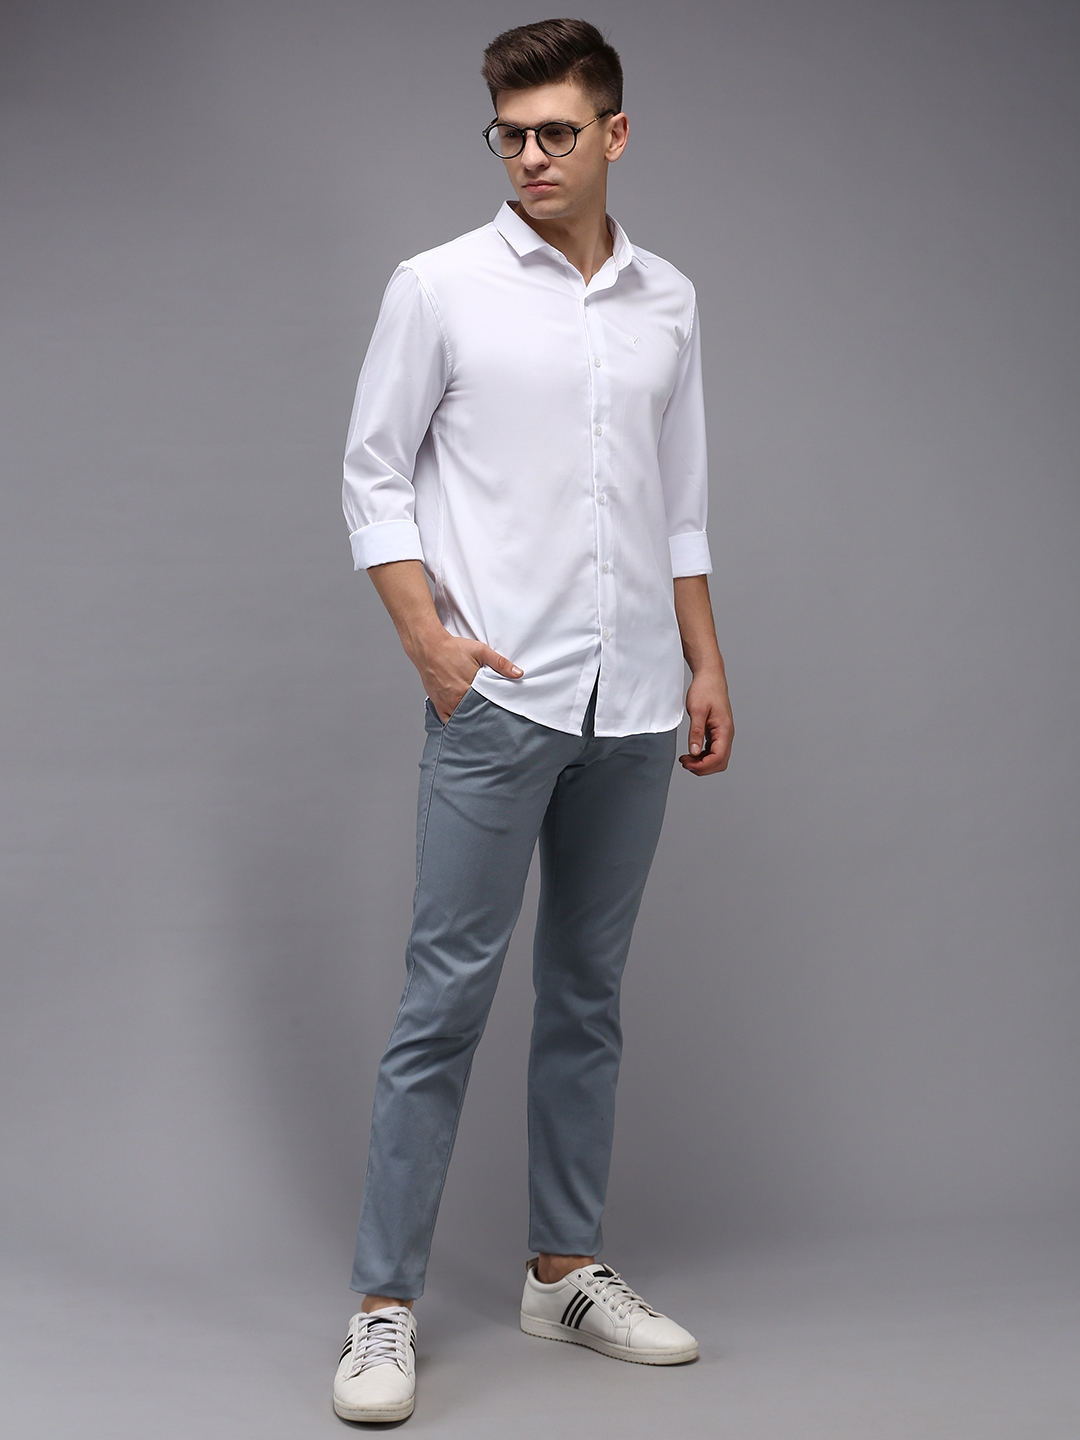 Men's White Polyester Solid Casual Shirts